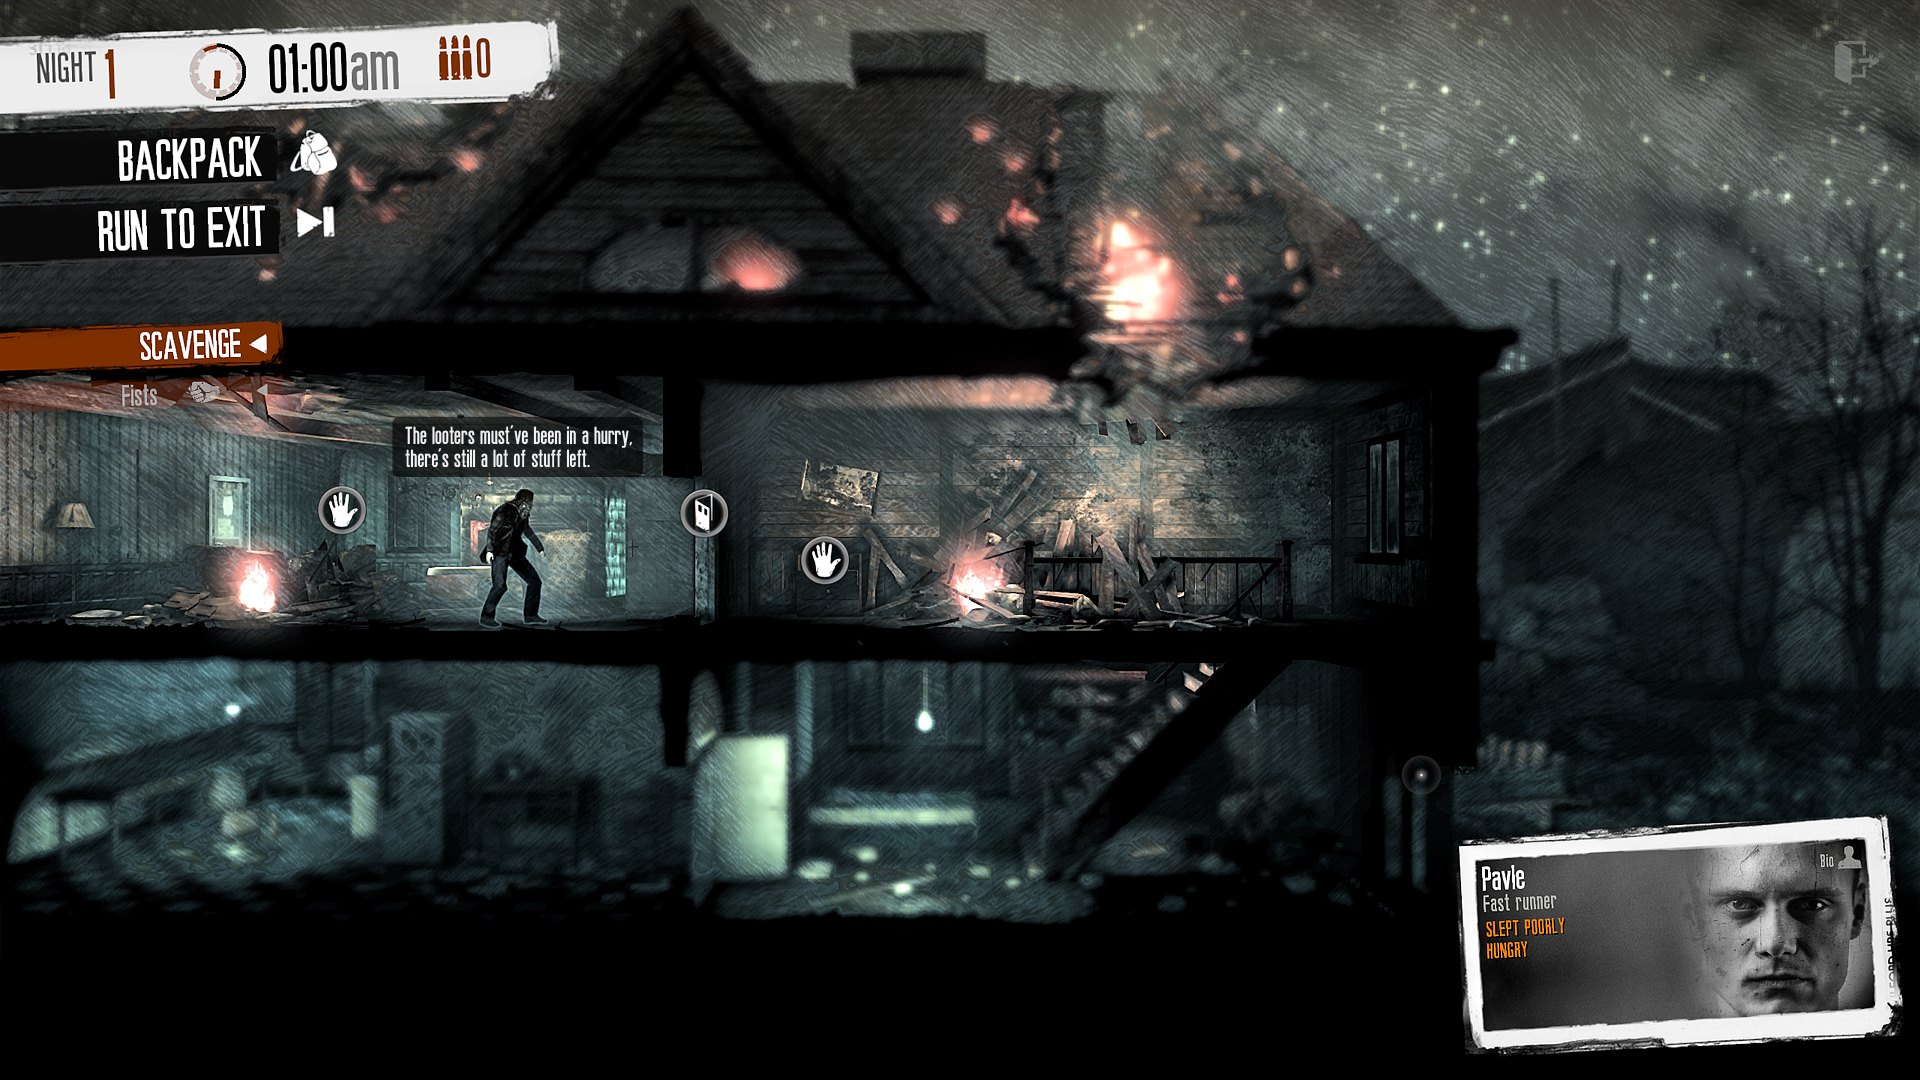    This War of Mine-RELOADED,